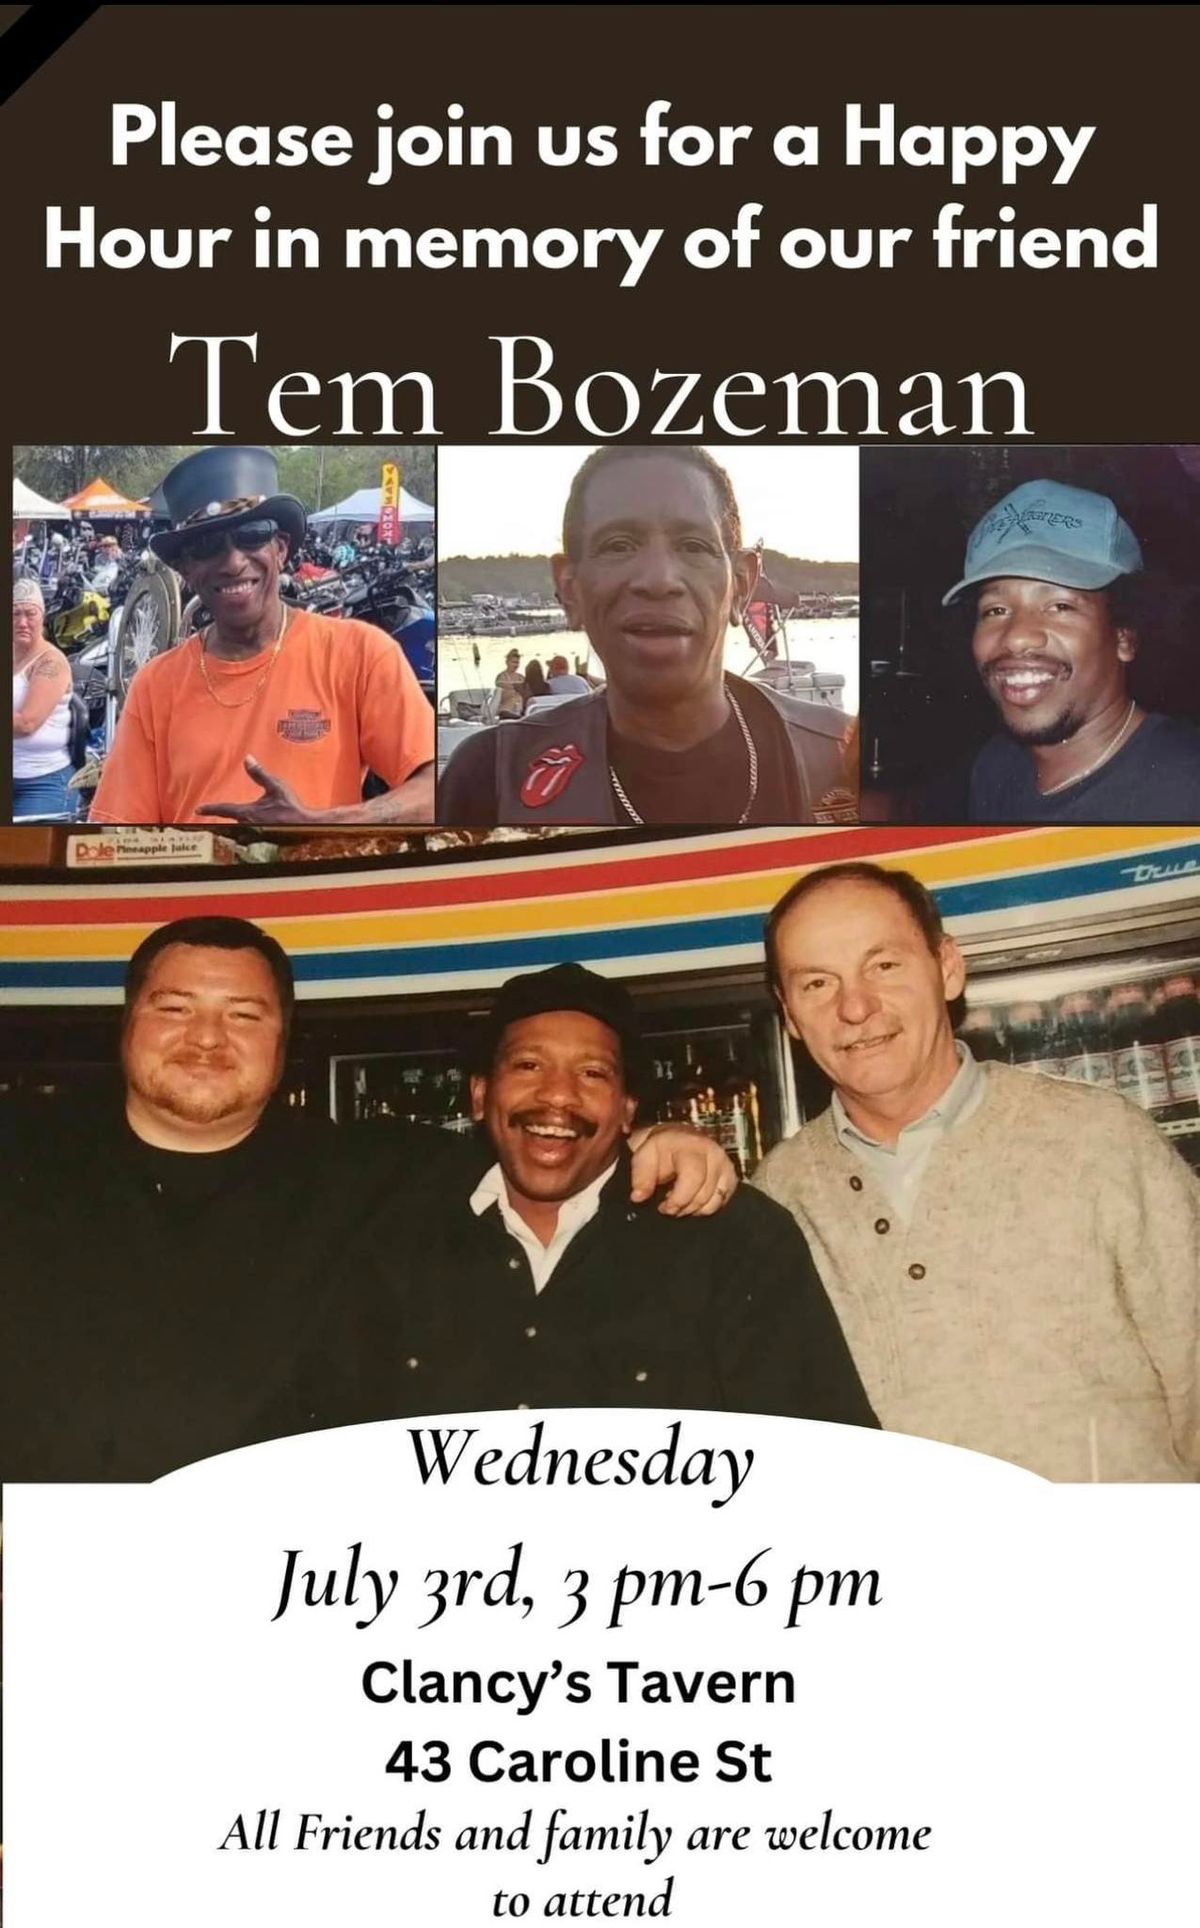 Happy Hour in Memory of our Friend, Tem Bozeman 